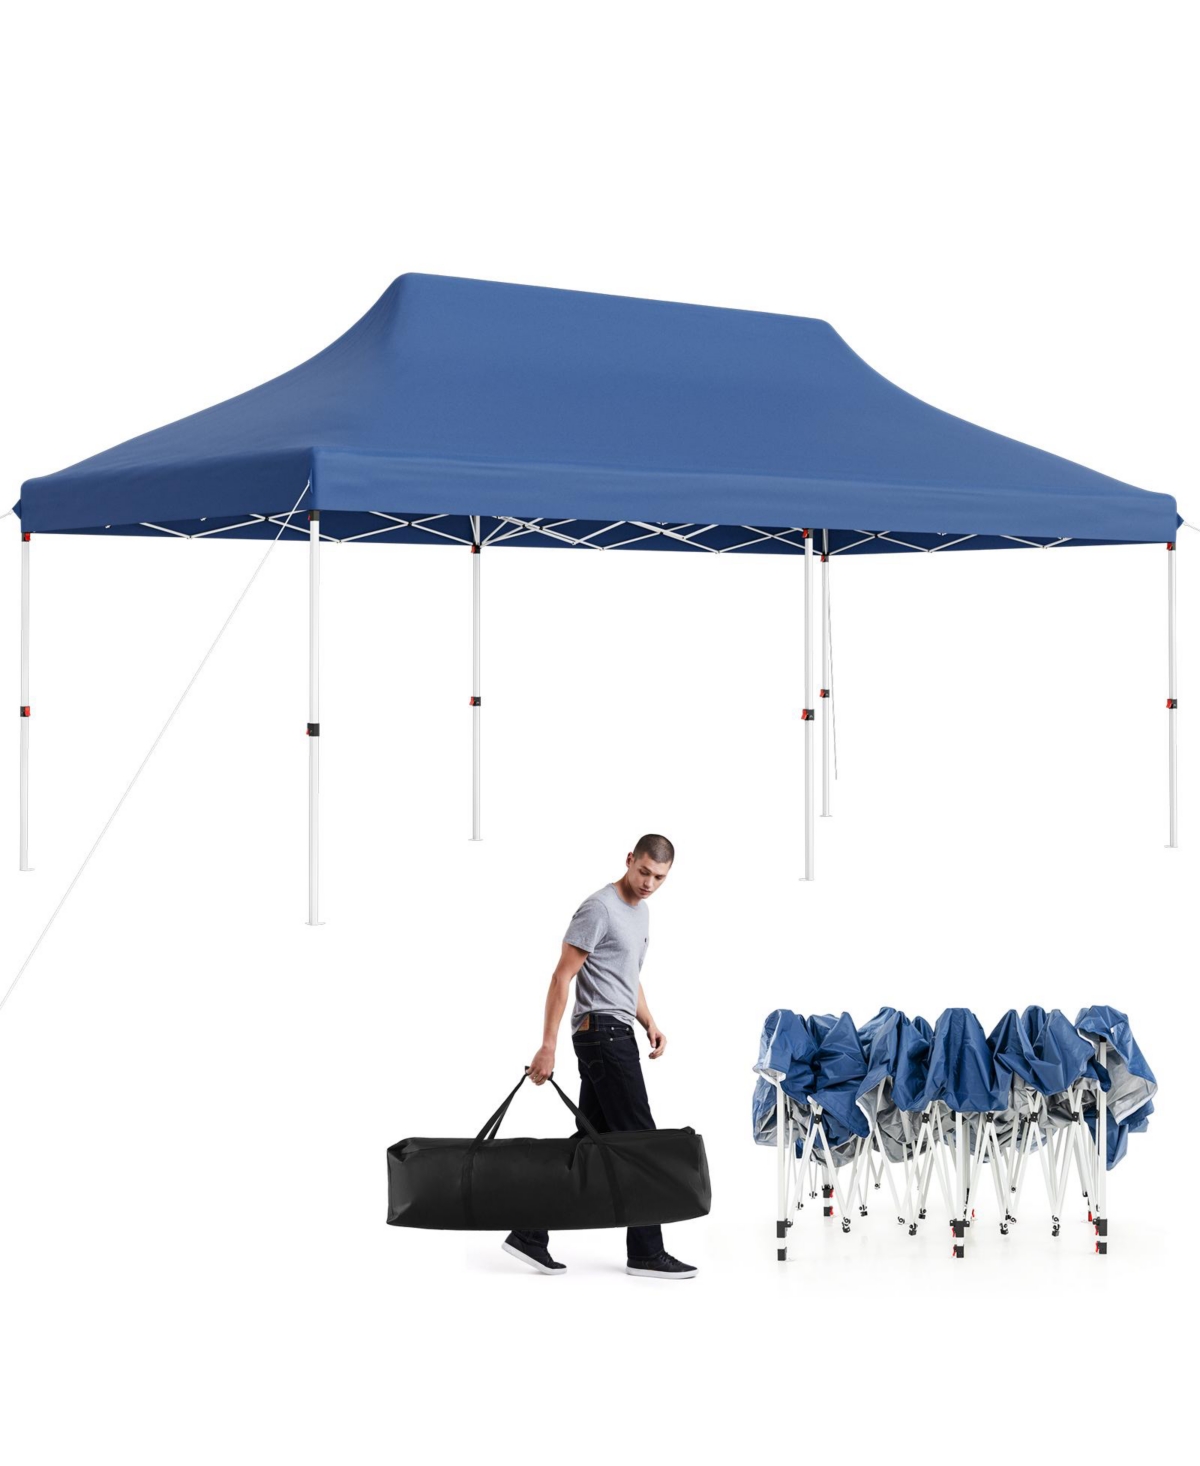 10 x 20 Ft Pop-up Canopy UPF50+ Sun Protection Tent with Carrying Bag - White